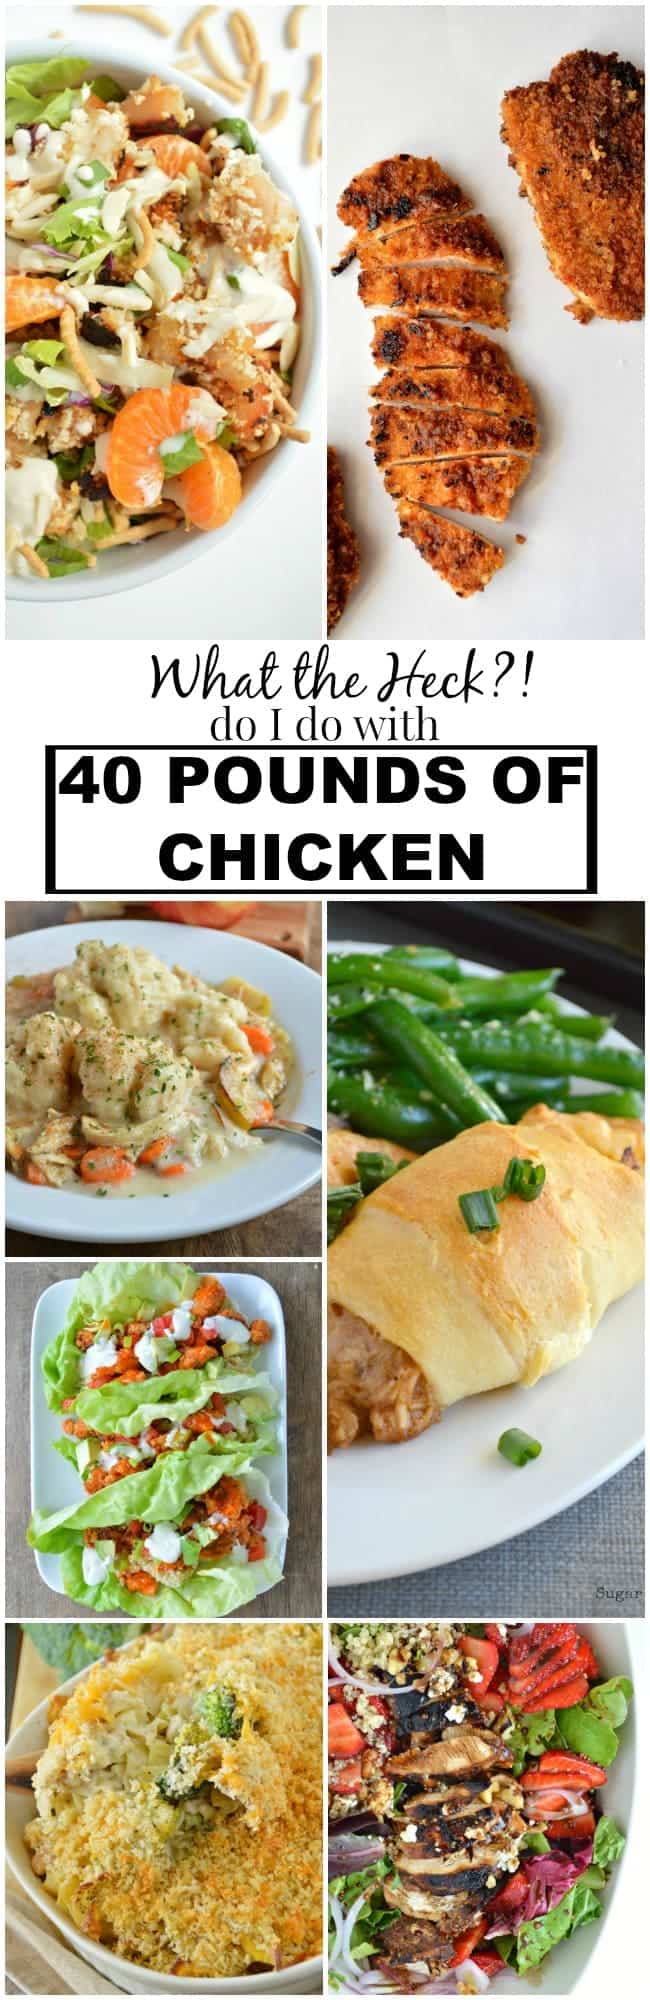 What to do woth 40 Pounds of Chicken